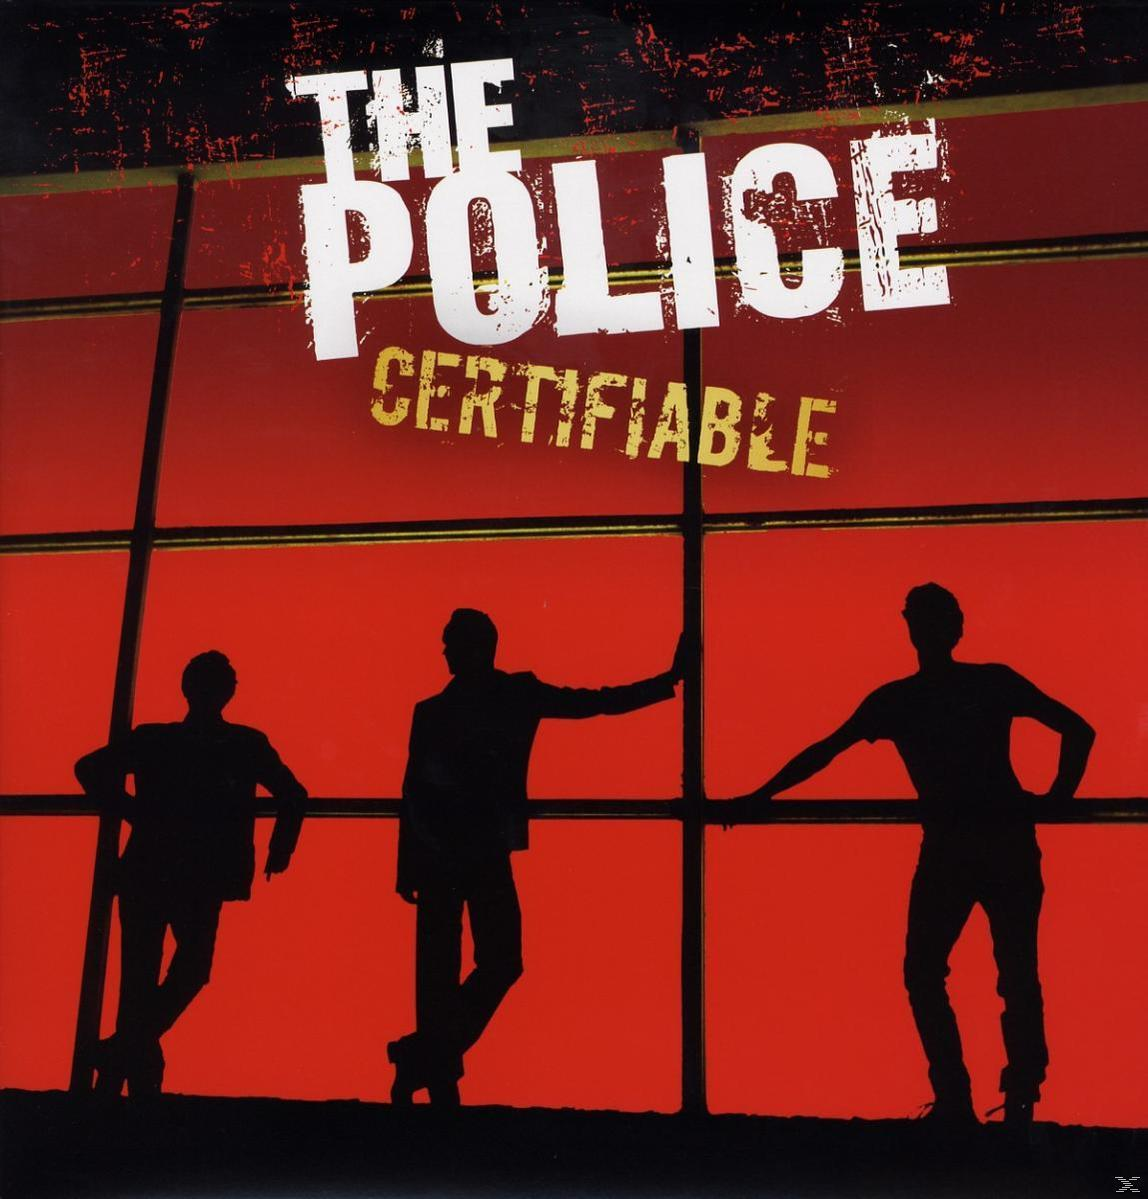 The - (Vinyl) Police - Certifiable